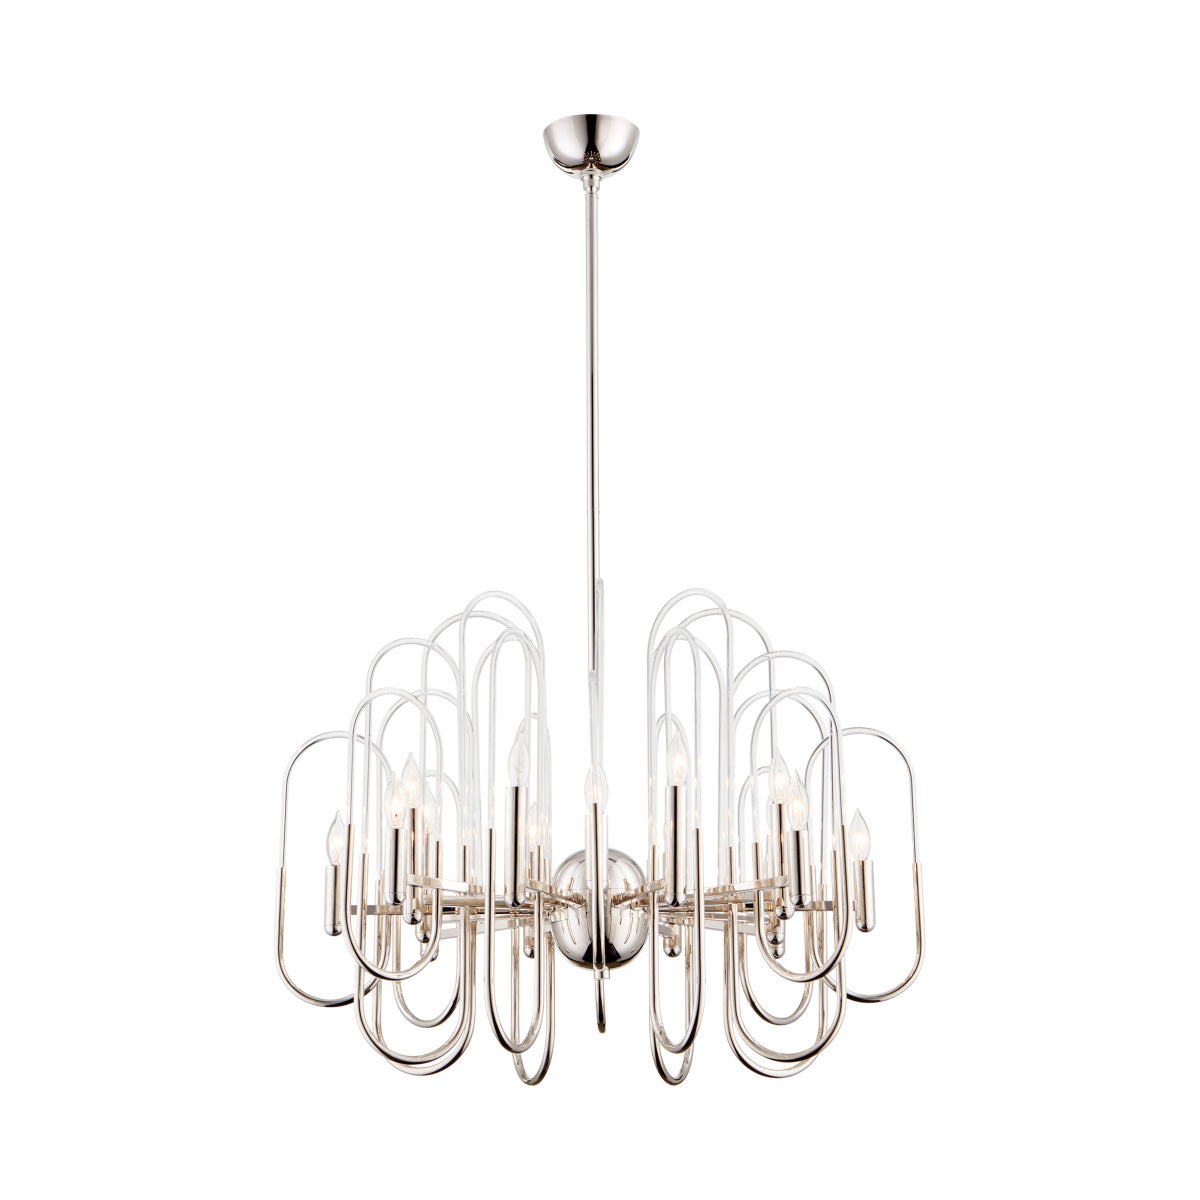 Champ-Elysees chandeliers Light chandeliers 16-Light | Polished Nickel